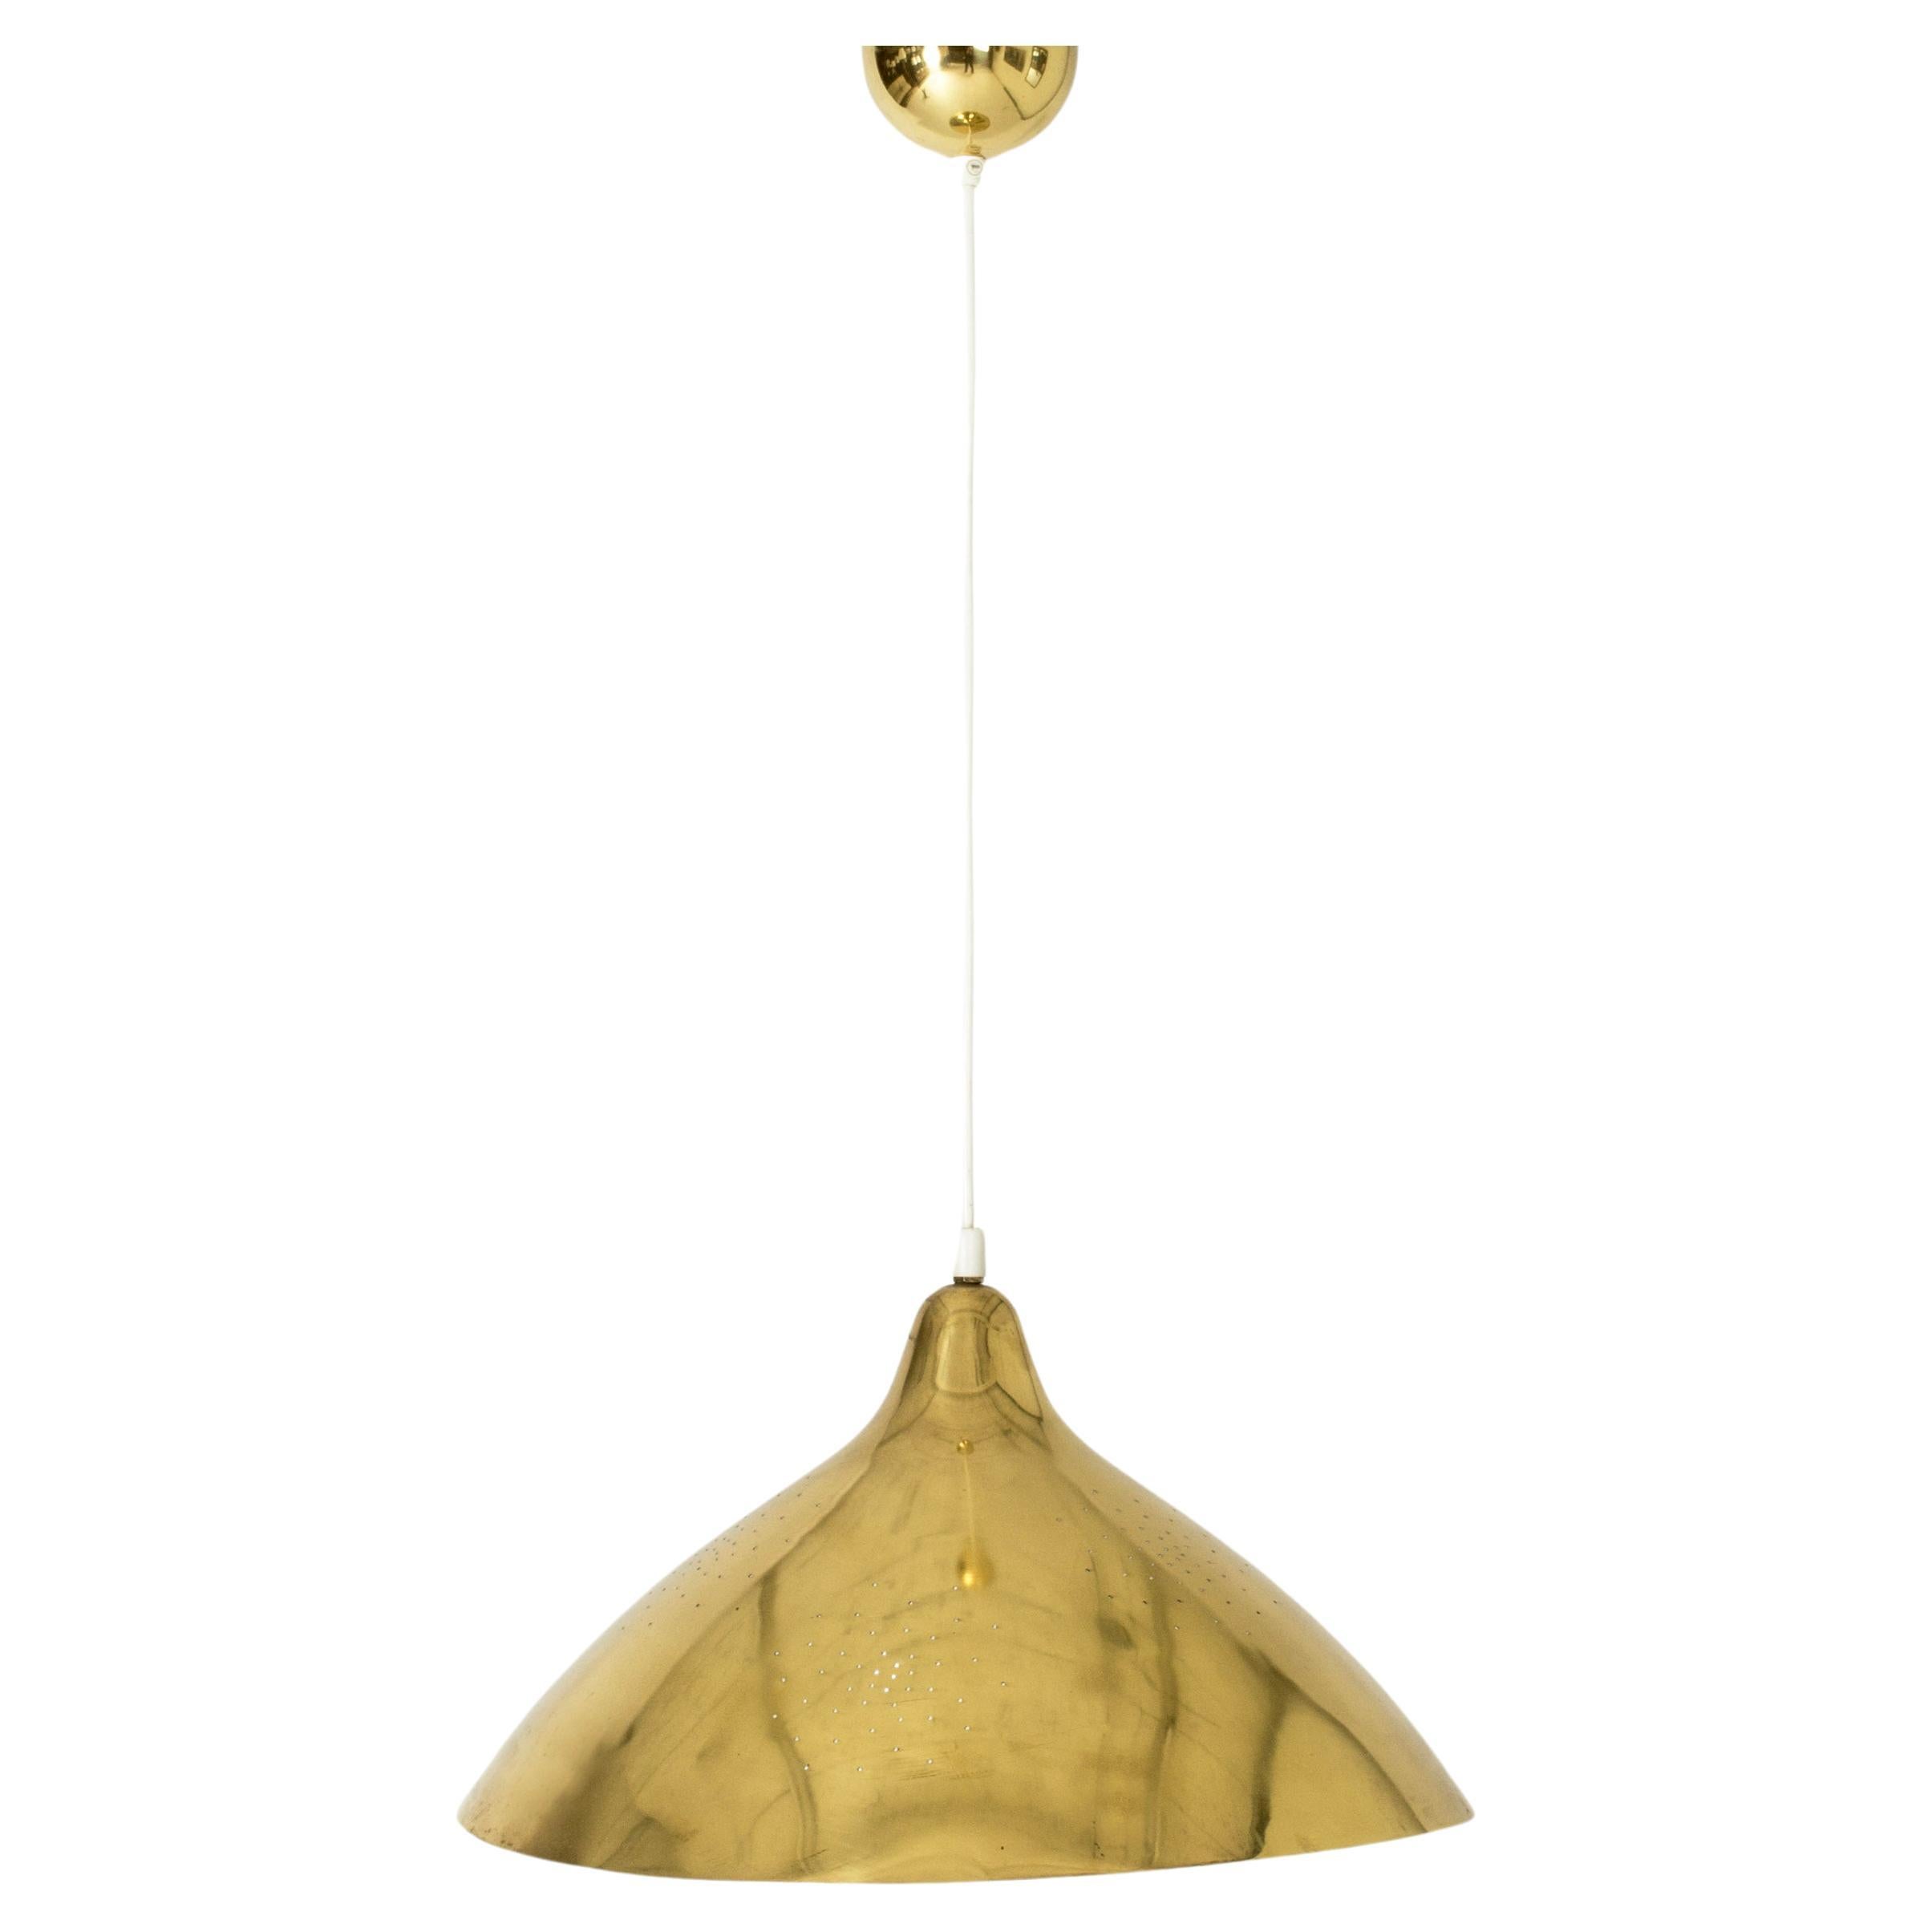 Midcentury Brass Pendant Lamp by Lisa Johansson-Pape, Orno, Finland, 1950s For Sale